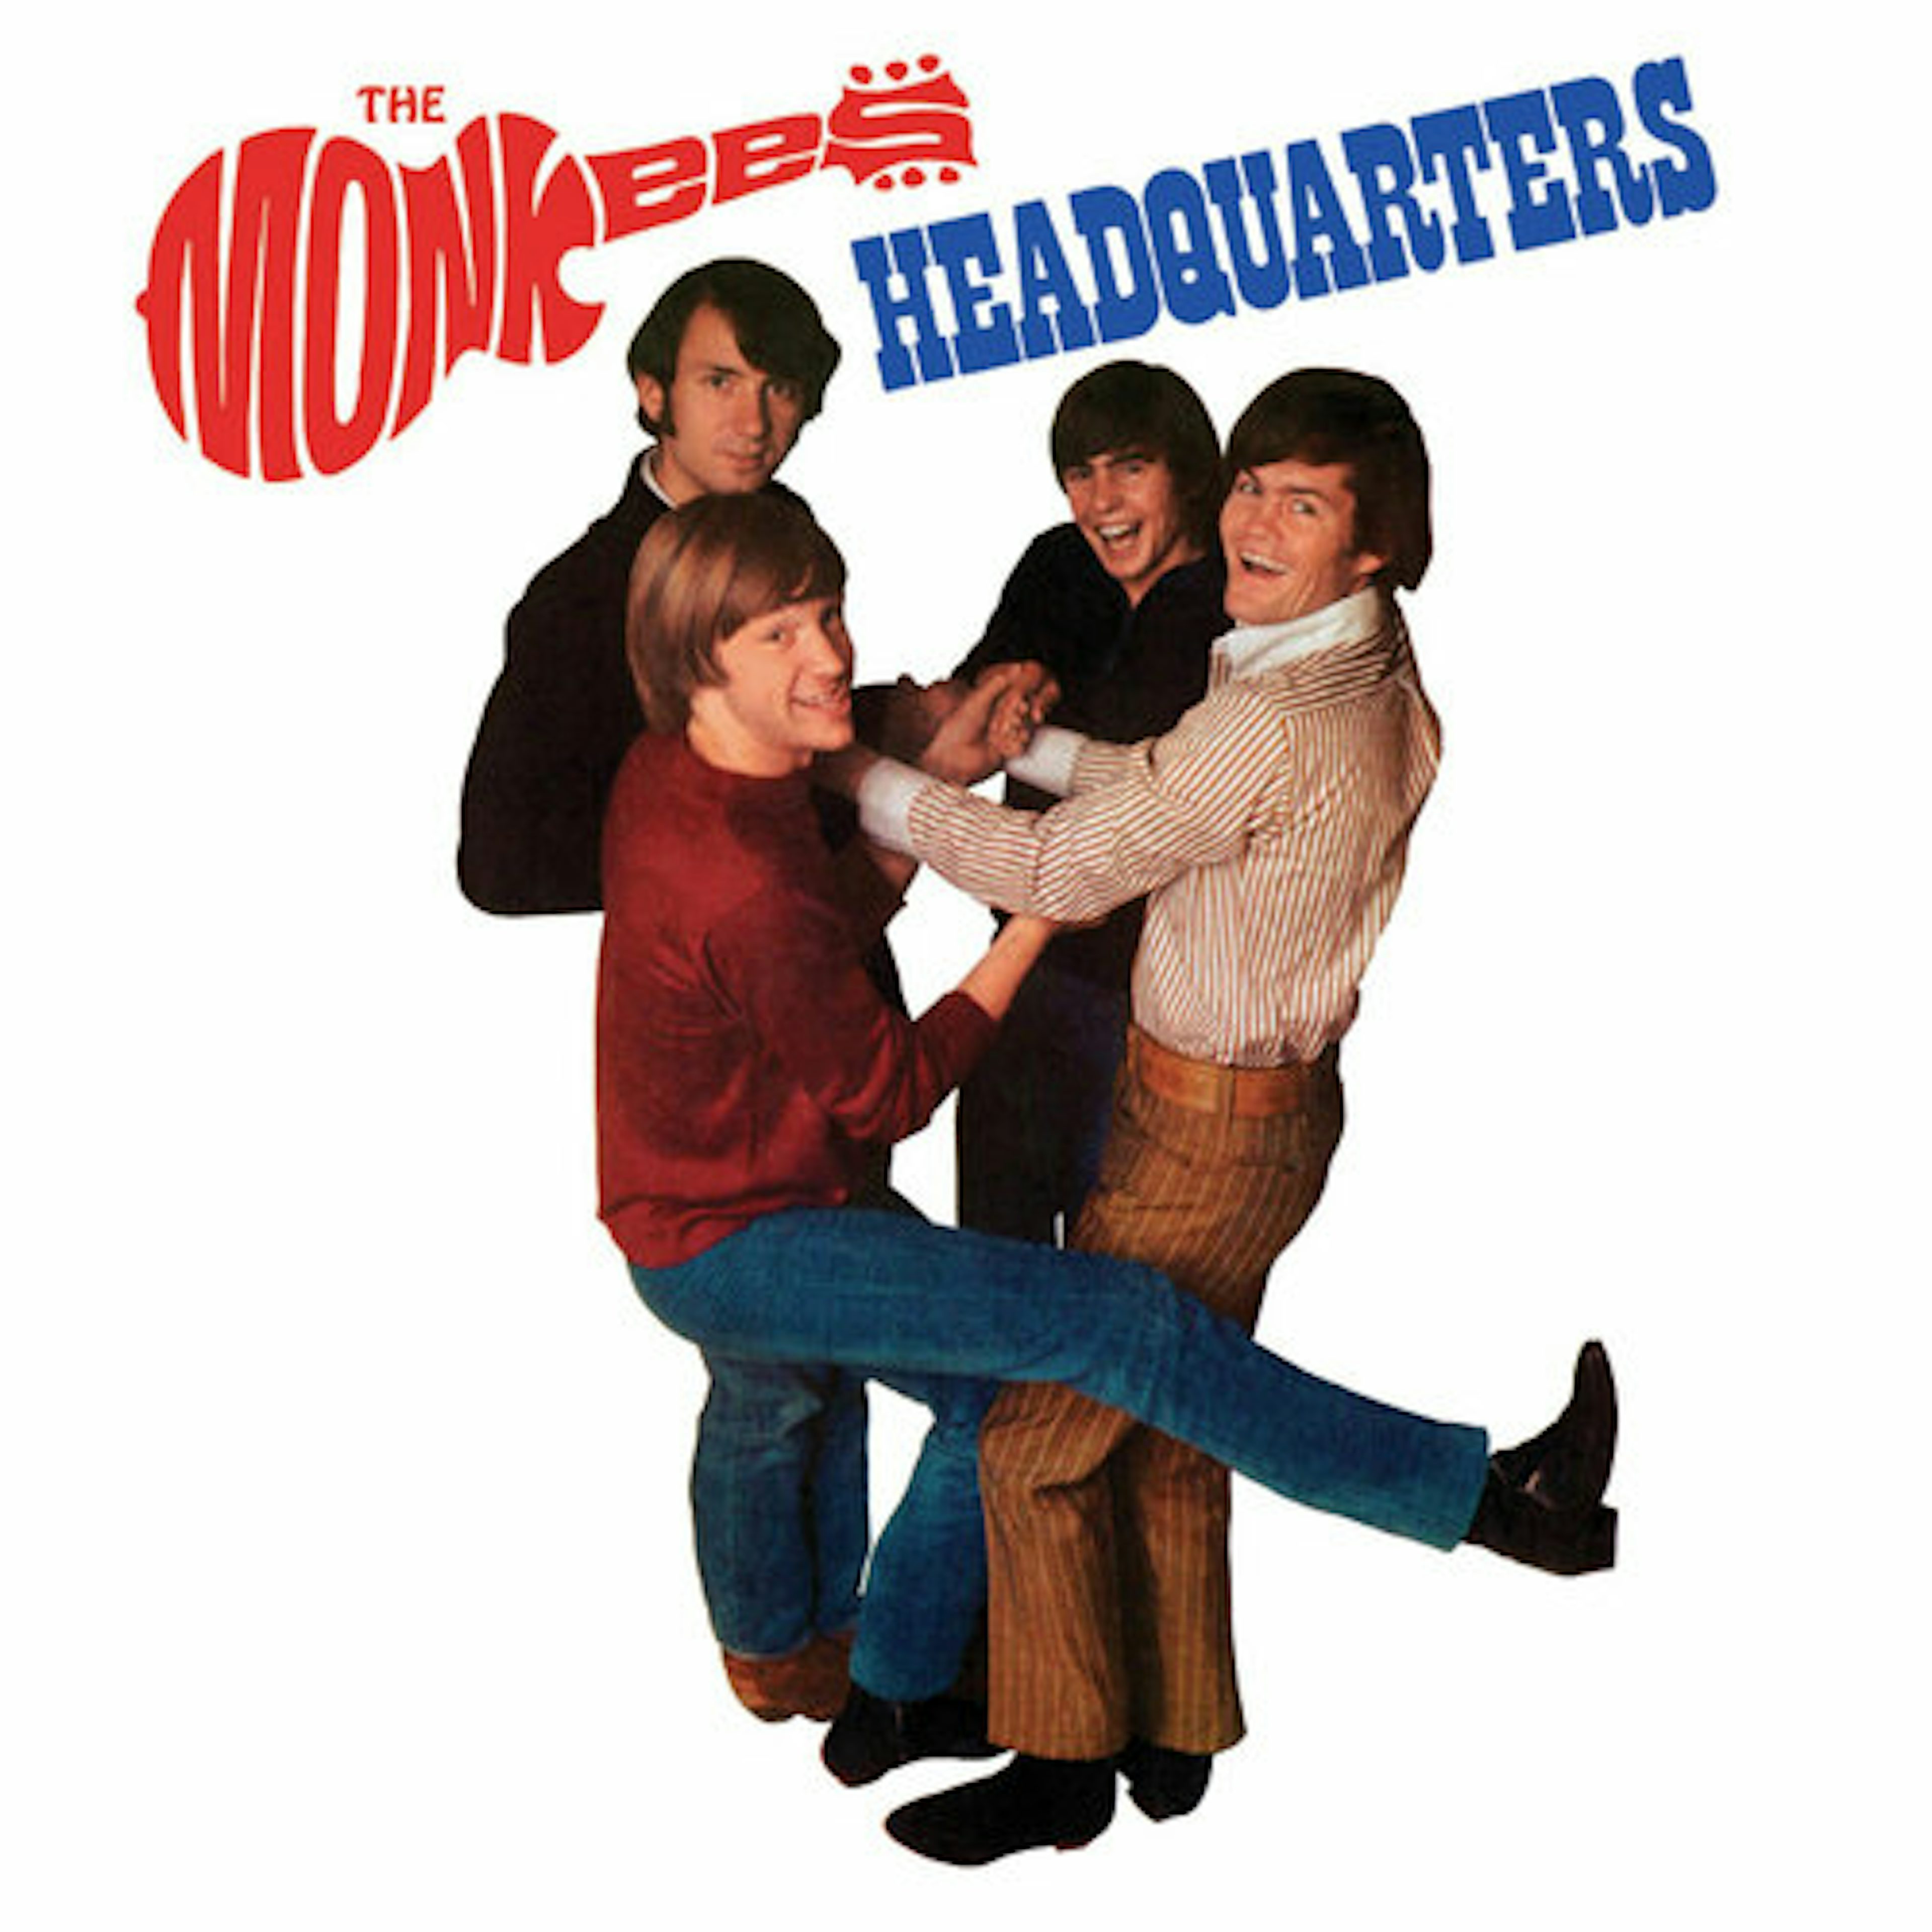 The Monkees - Discography - 320kbps ~ MUSIC THAT WE ADORE